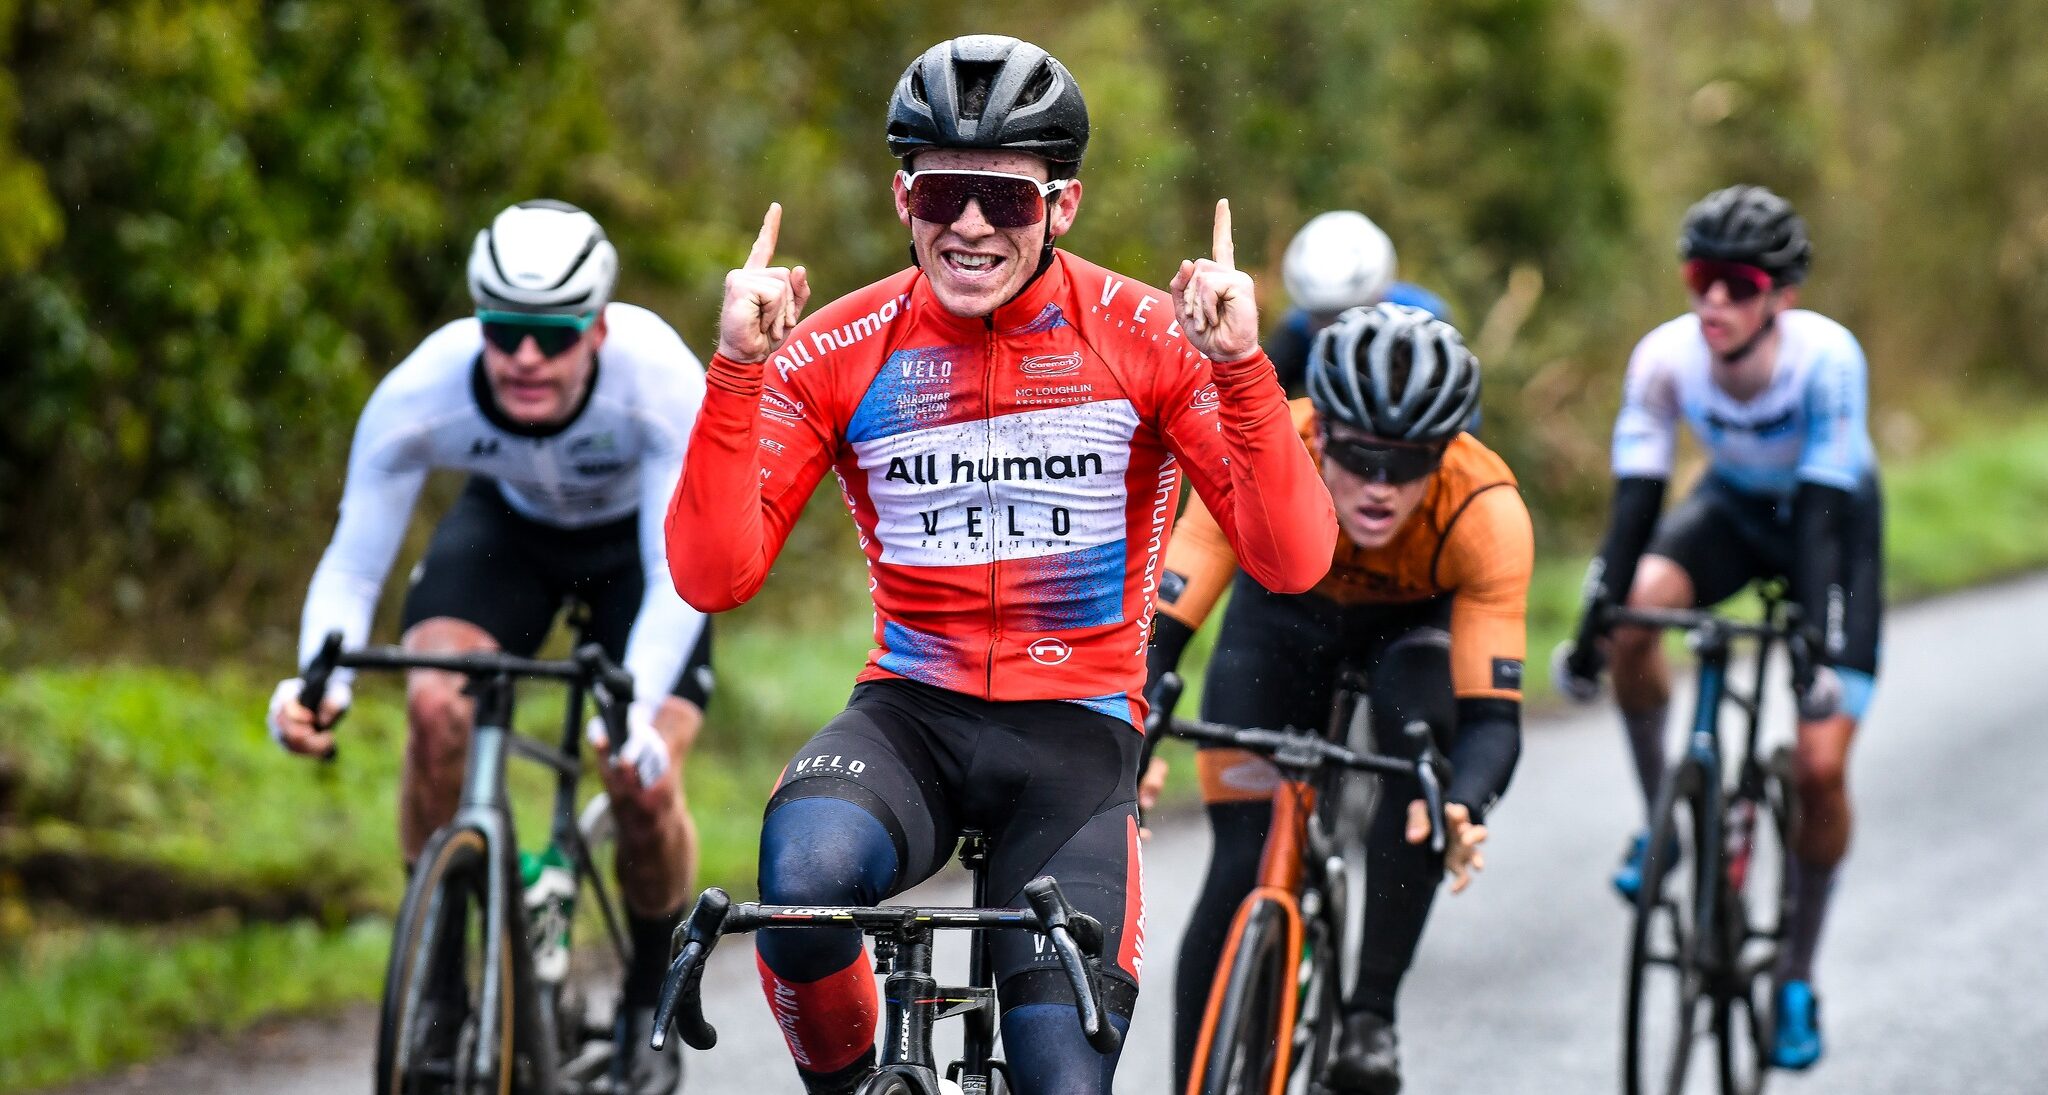 Feeley best in cagey finale at Boyne GP after all-out attacks up front